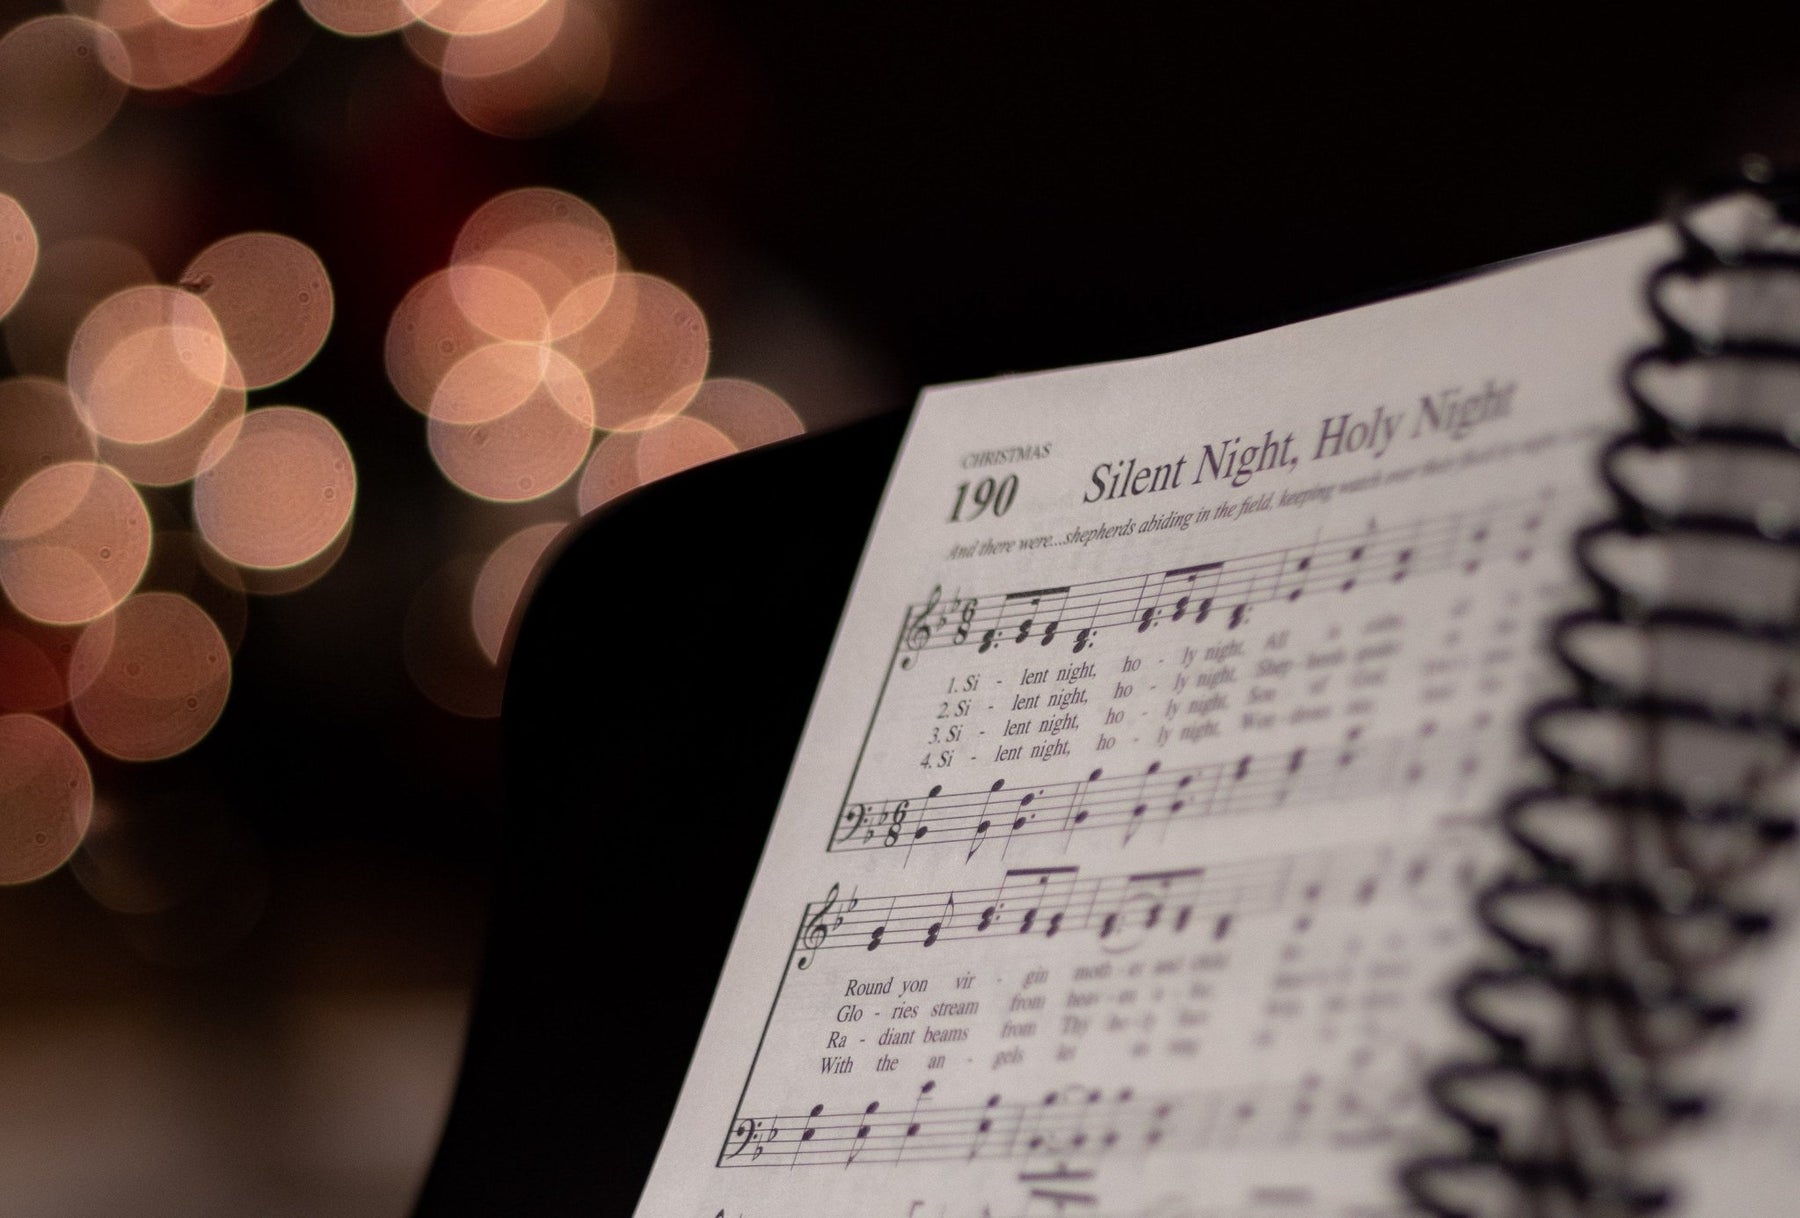 Space, the Civil War, and UNESCO: 7 Surprising Stories About Your Favorite Christmas Carols - Antsy Labs